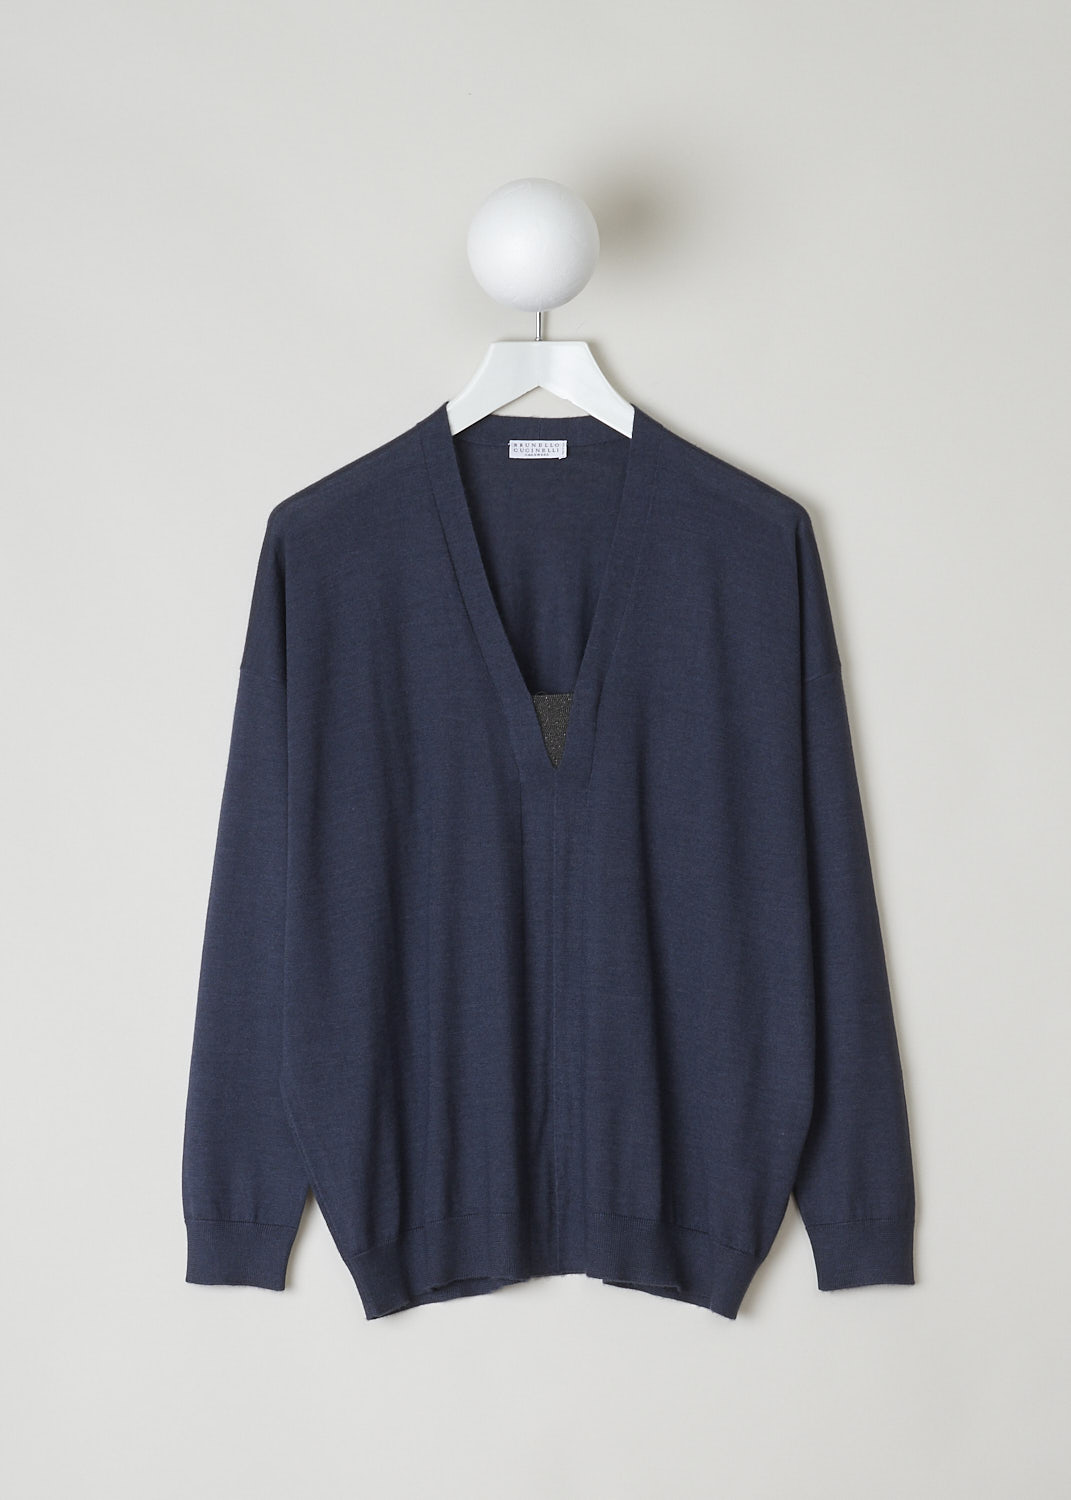 BRUNELLO CUCINELLI, NAVY BLUE LONG WITH SUBTLE MONILI DETAIL, M13874202_C7186, Blue, Front, This navy blue long sleeve top is made with a lightweight cashmere blend. The top has a V-neckline that is decorated with the brand's signature monili beads. The cuffs and the hemline have a ribbed finish. 
